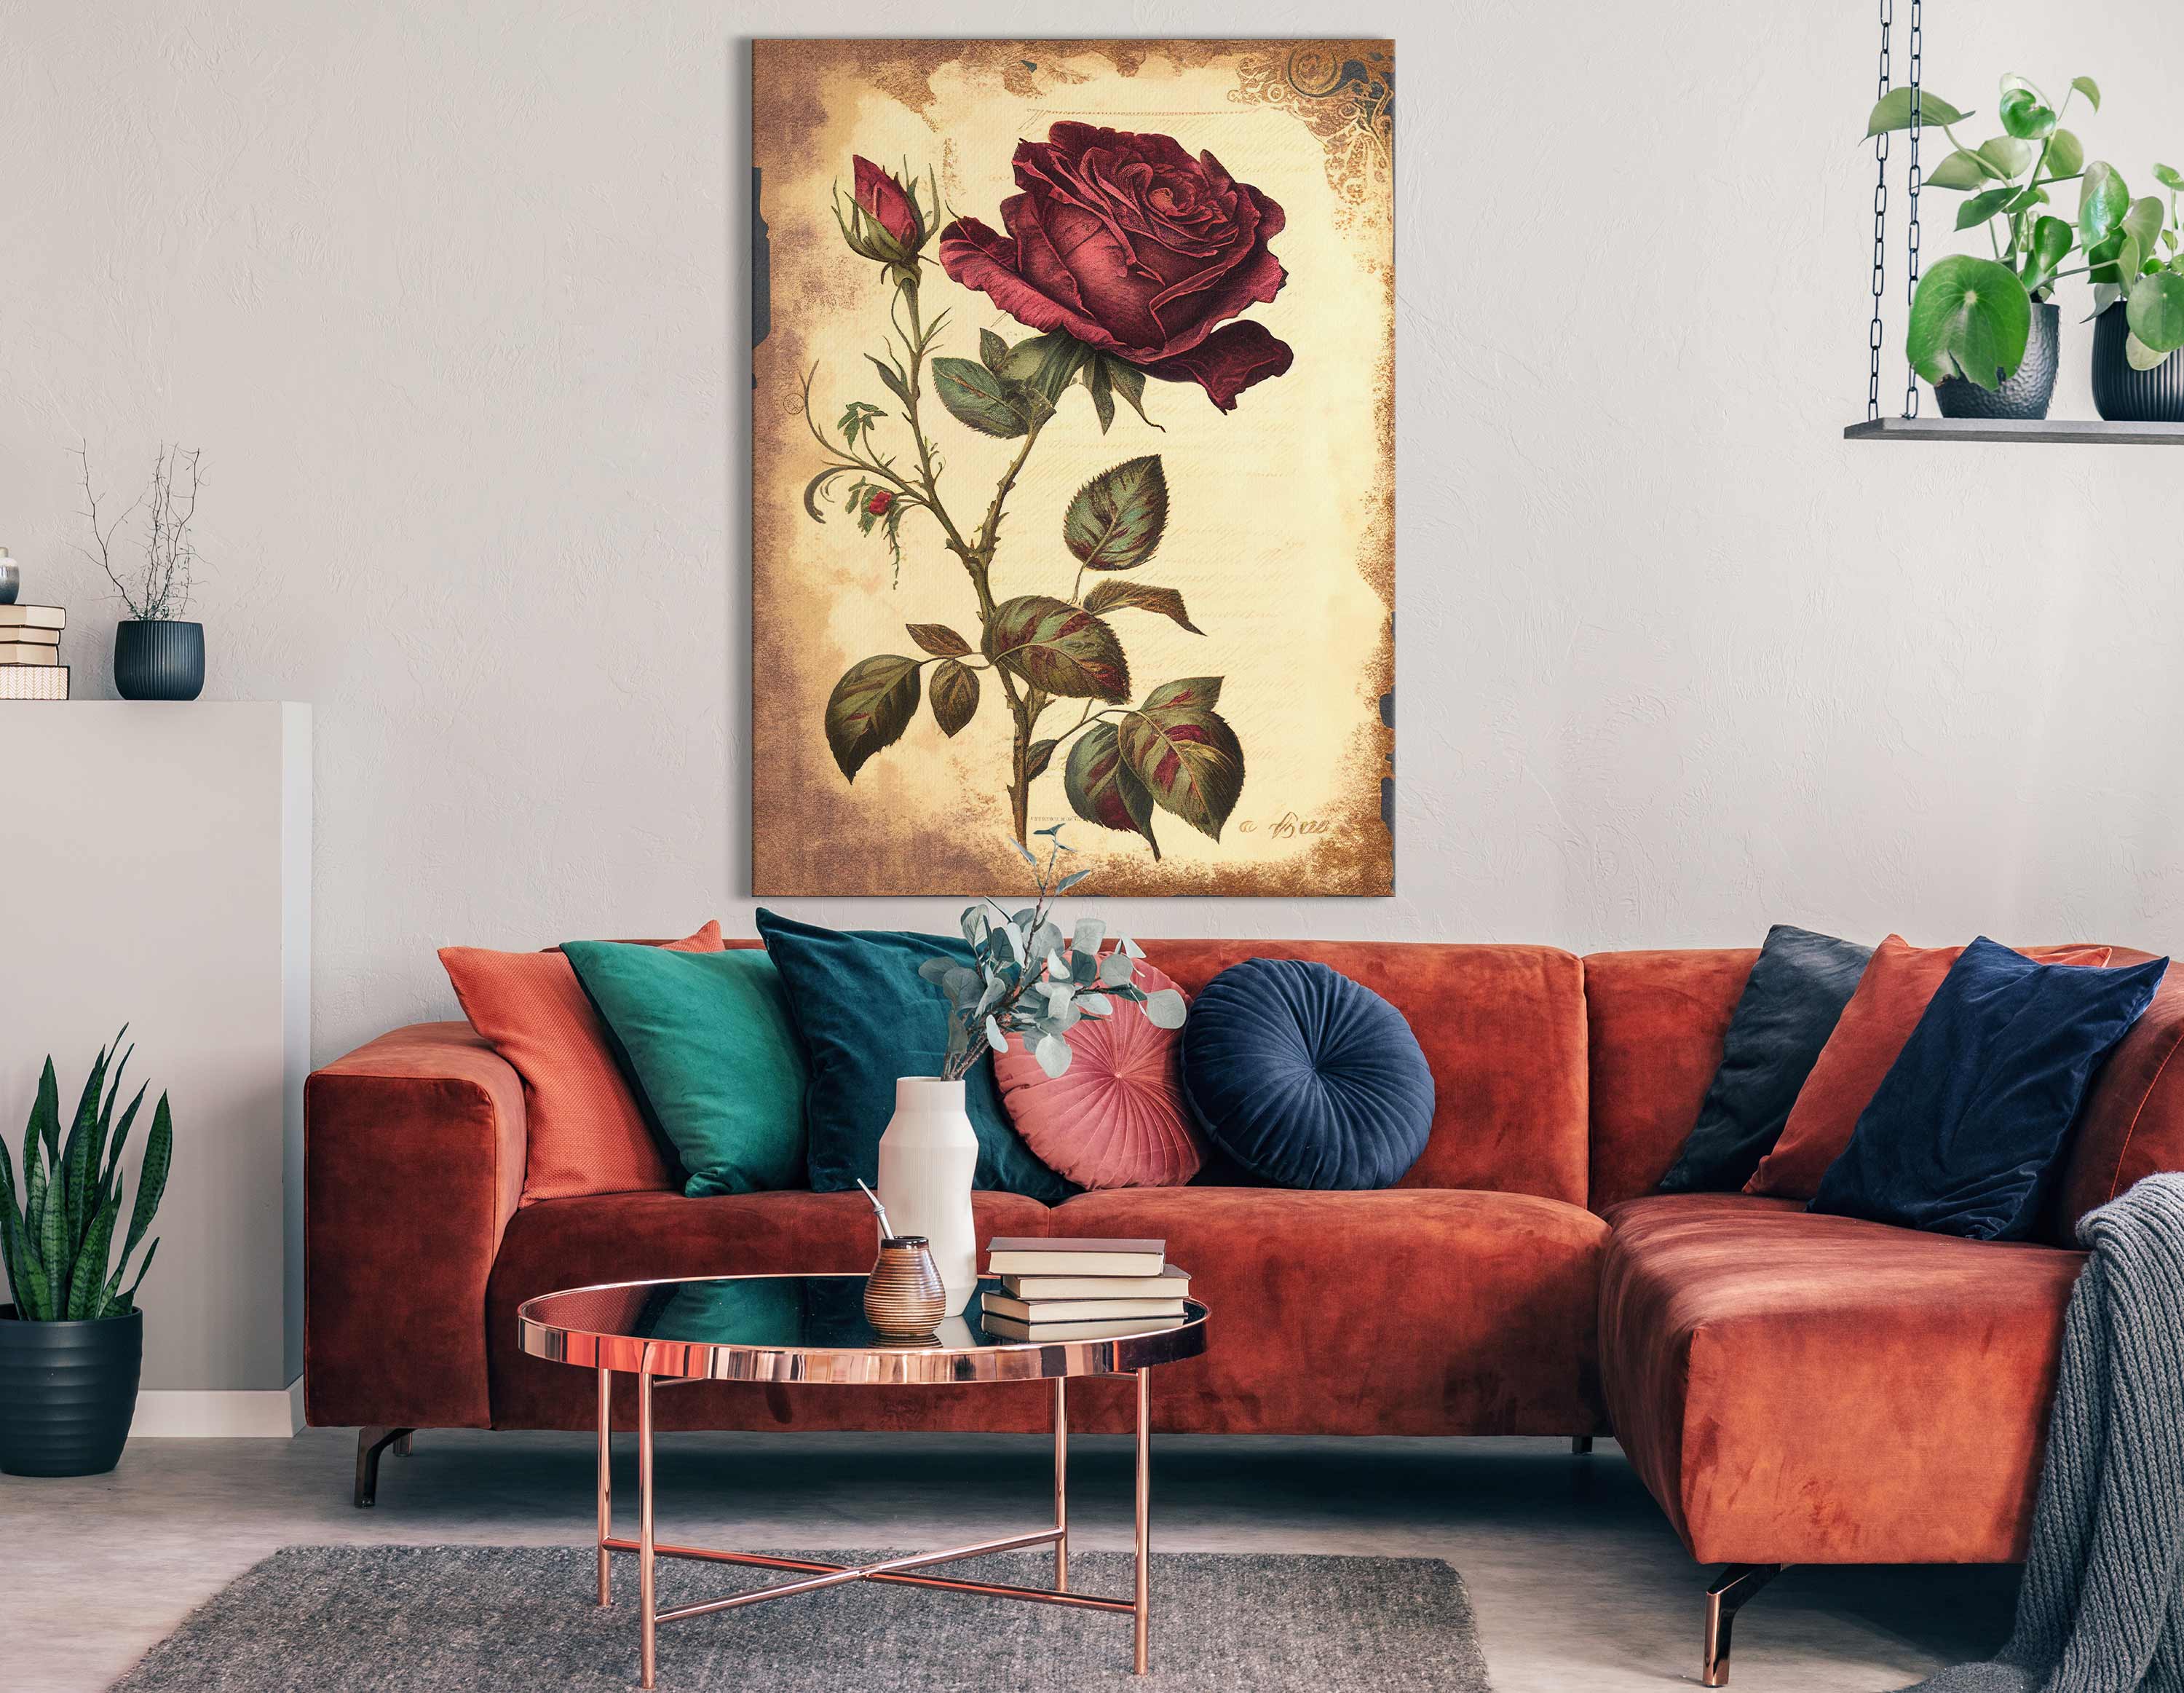 Traditional Rose with Ornate Design Wall Art